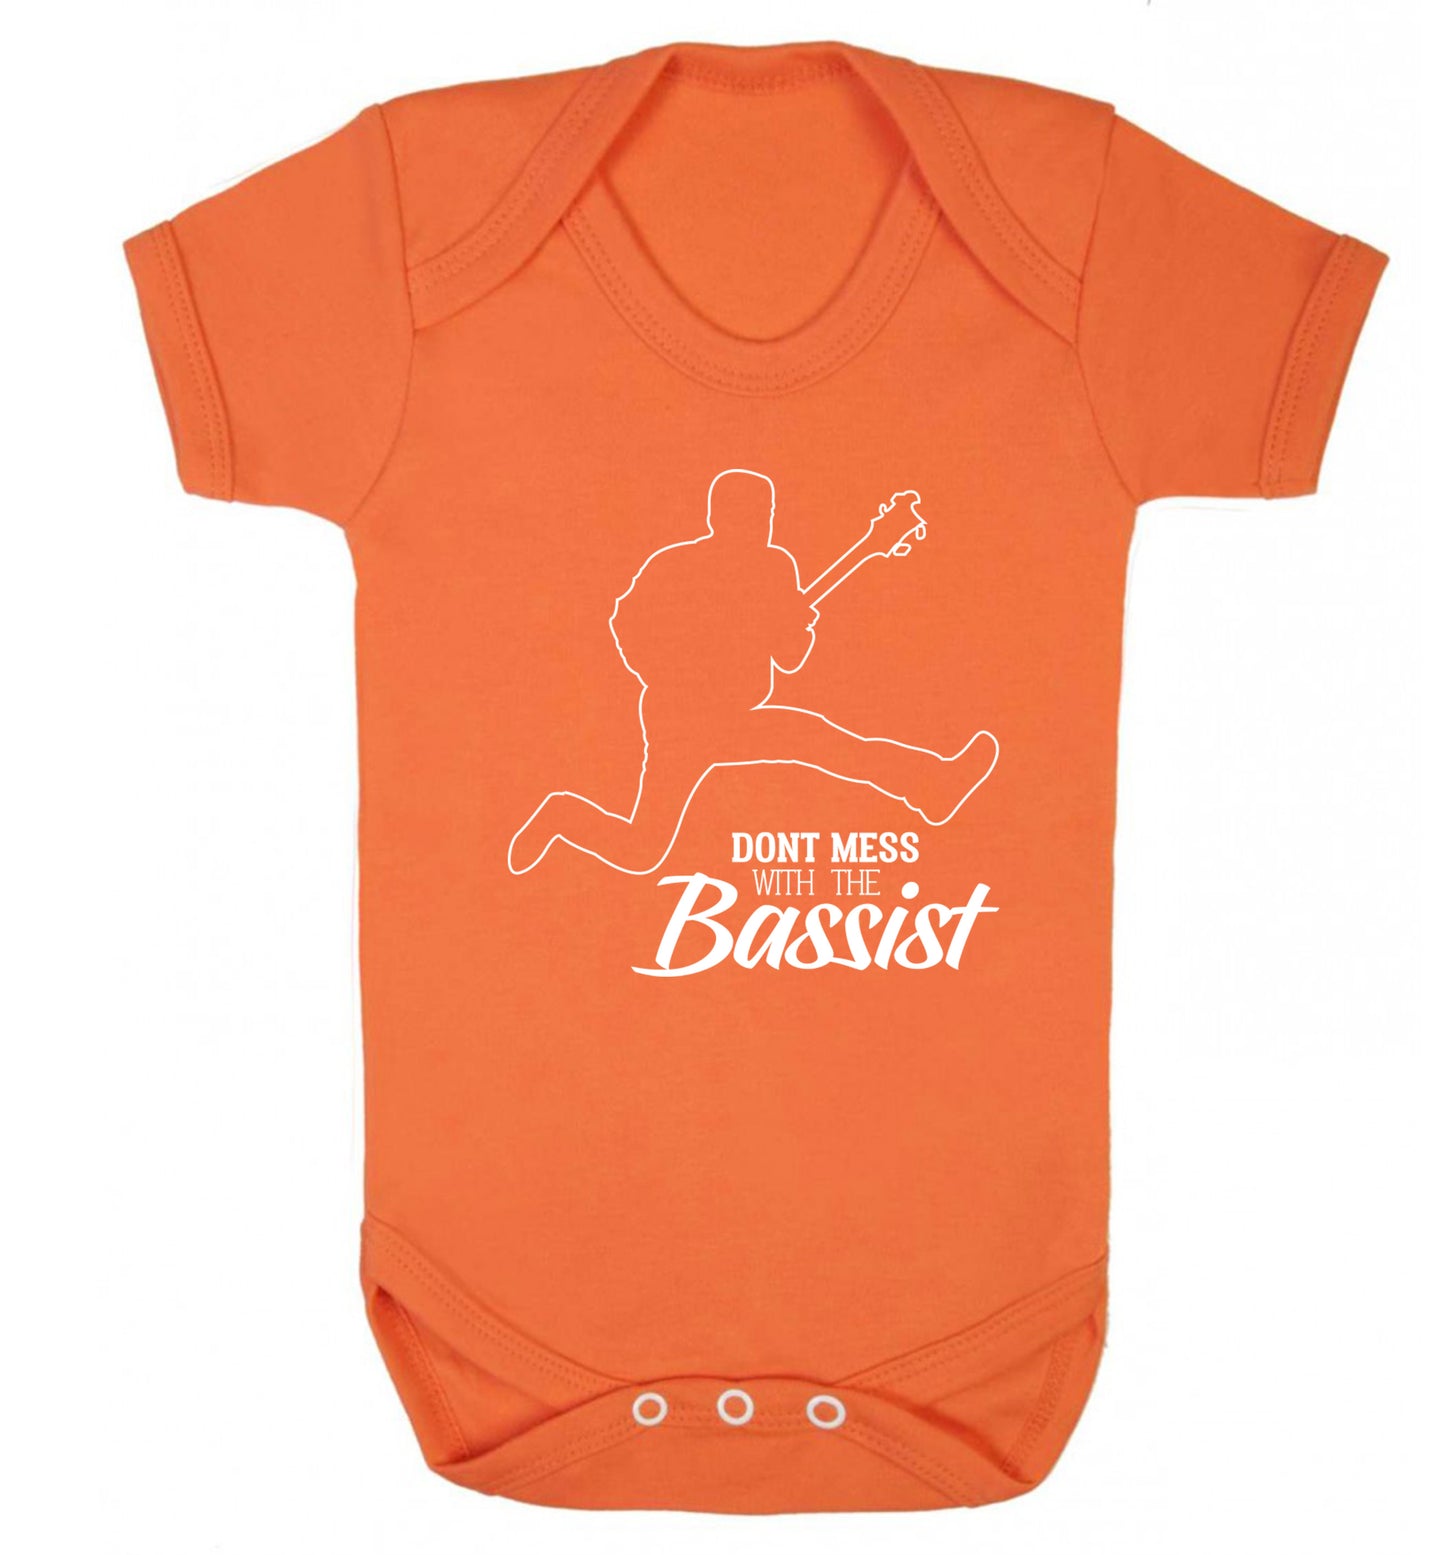 Dont mess with the bassist Baby Vest orange 18-24 months